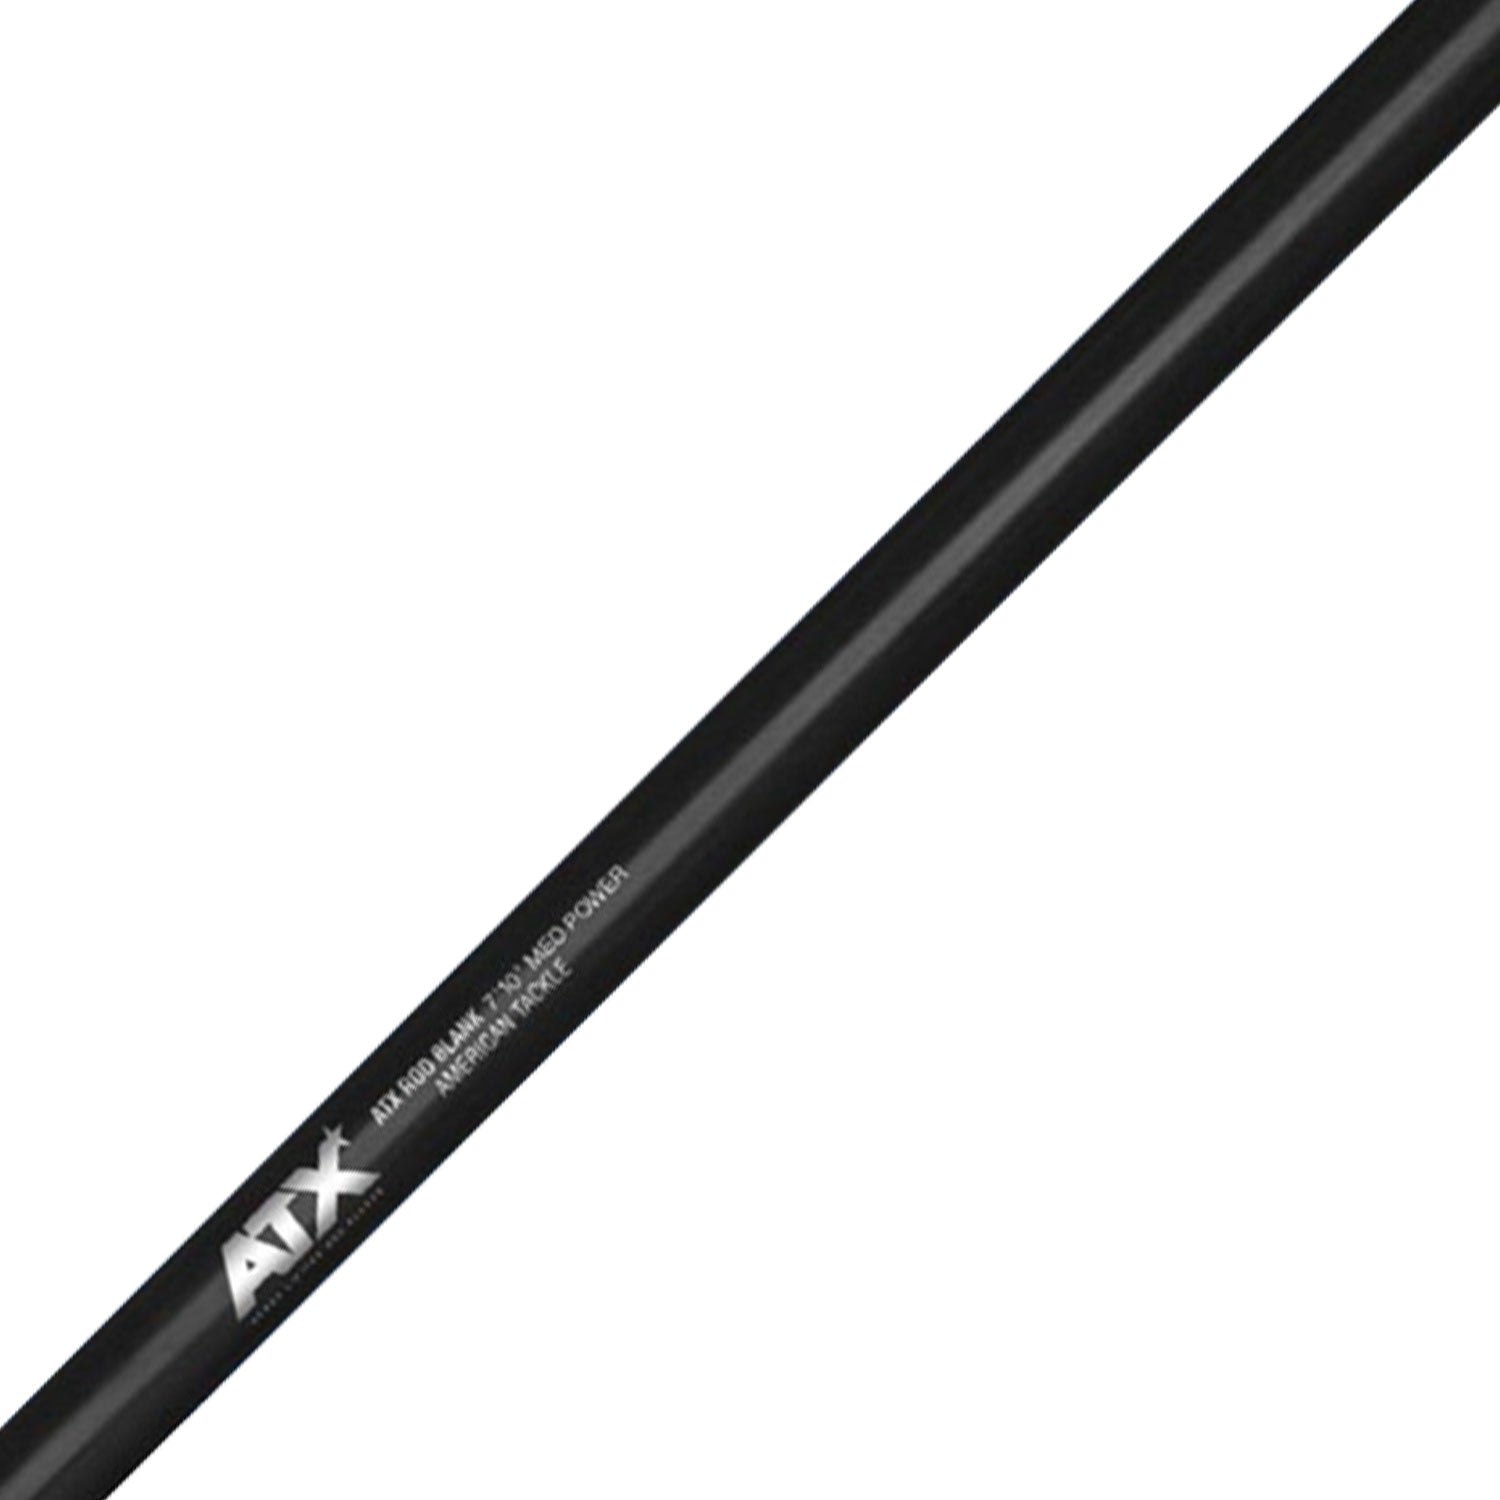 American Tackle AXGC70MH Graphite Composite Rod Blank